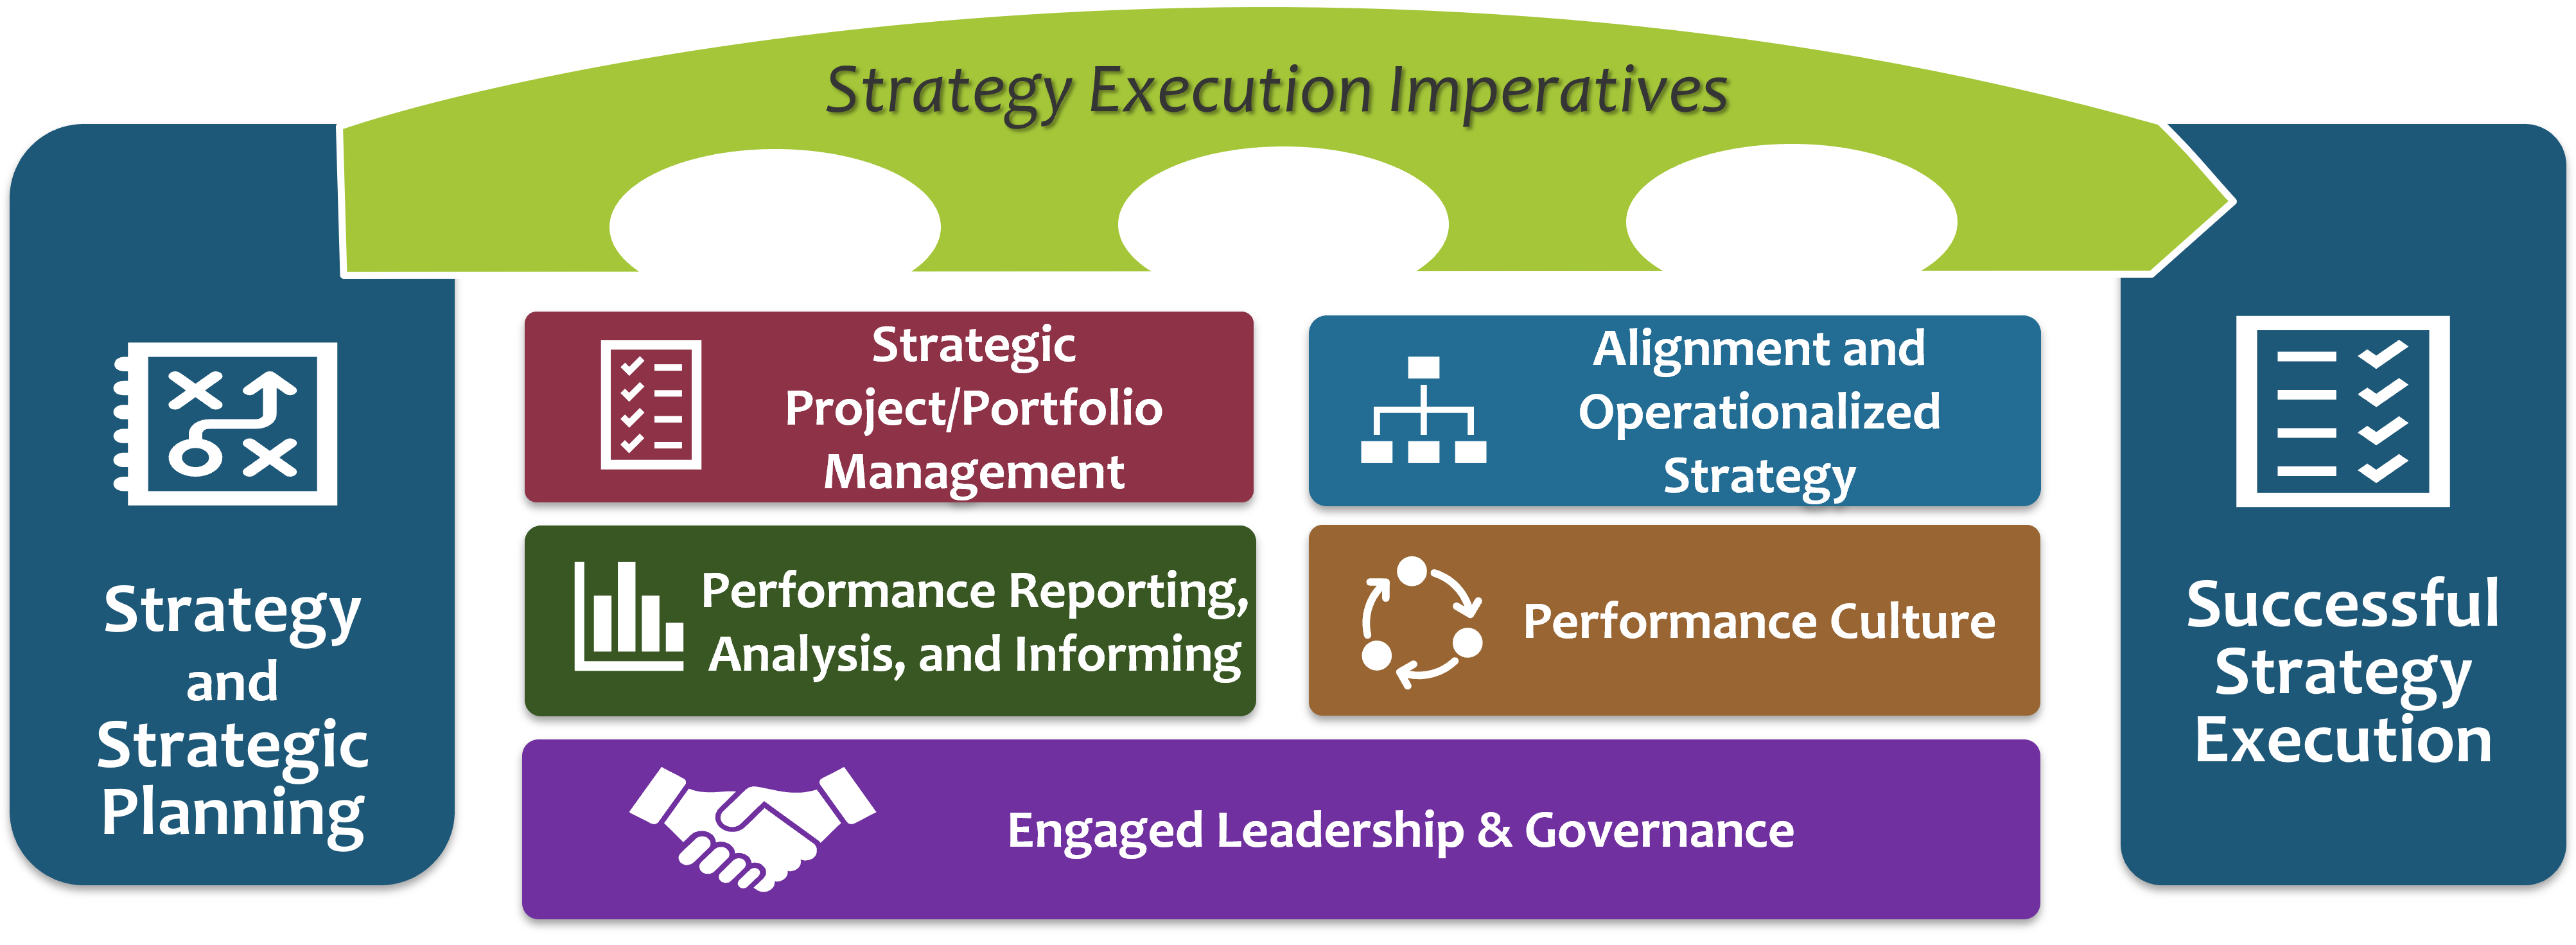 Strategy Execution Imperatives